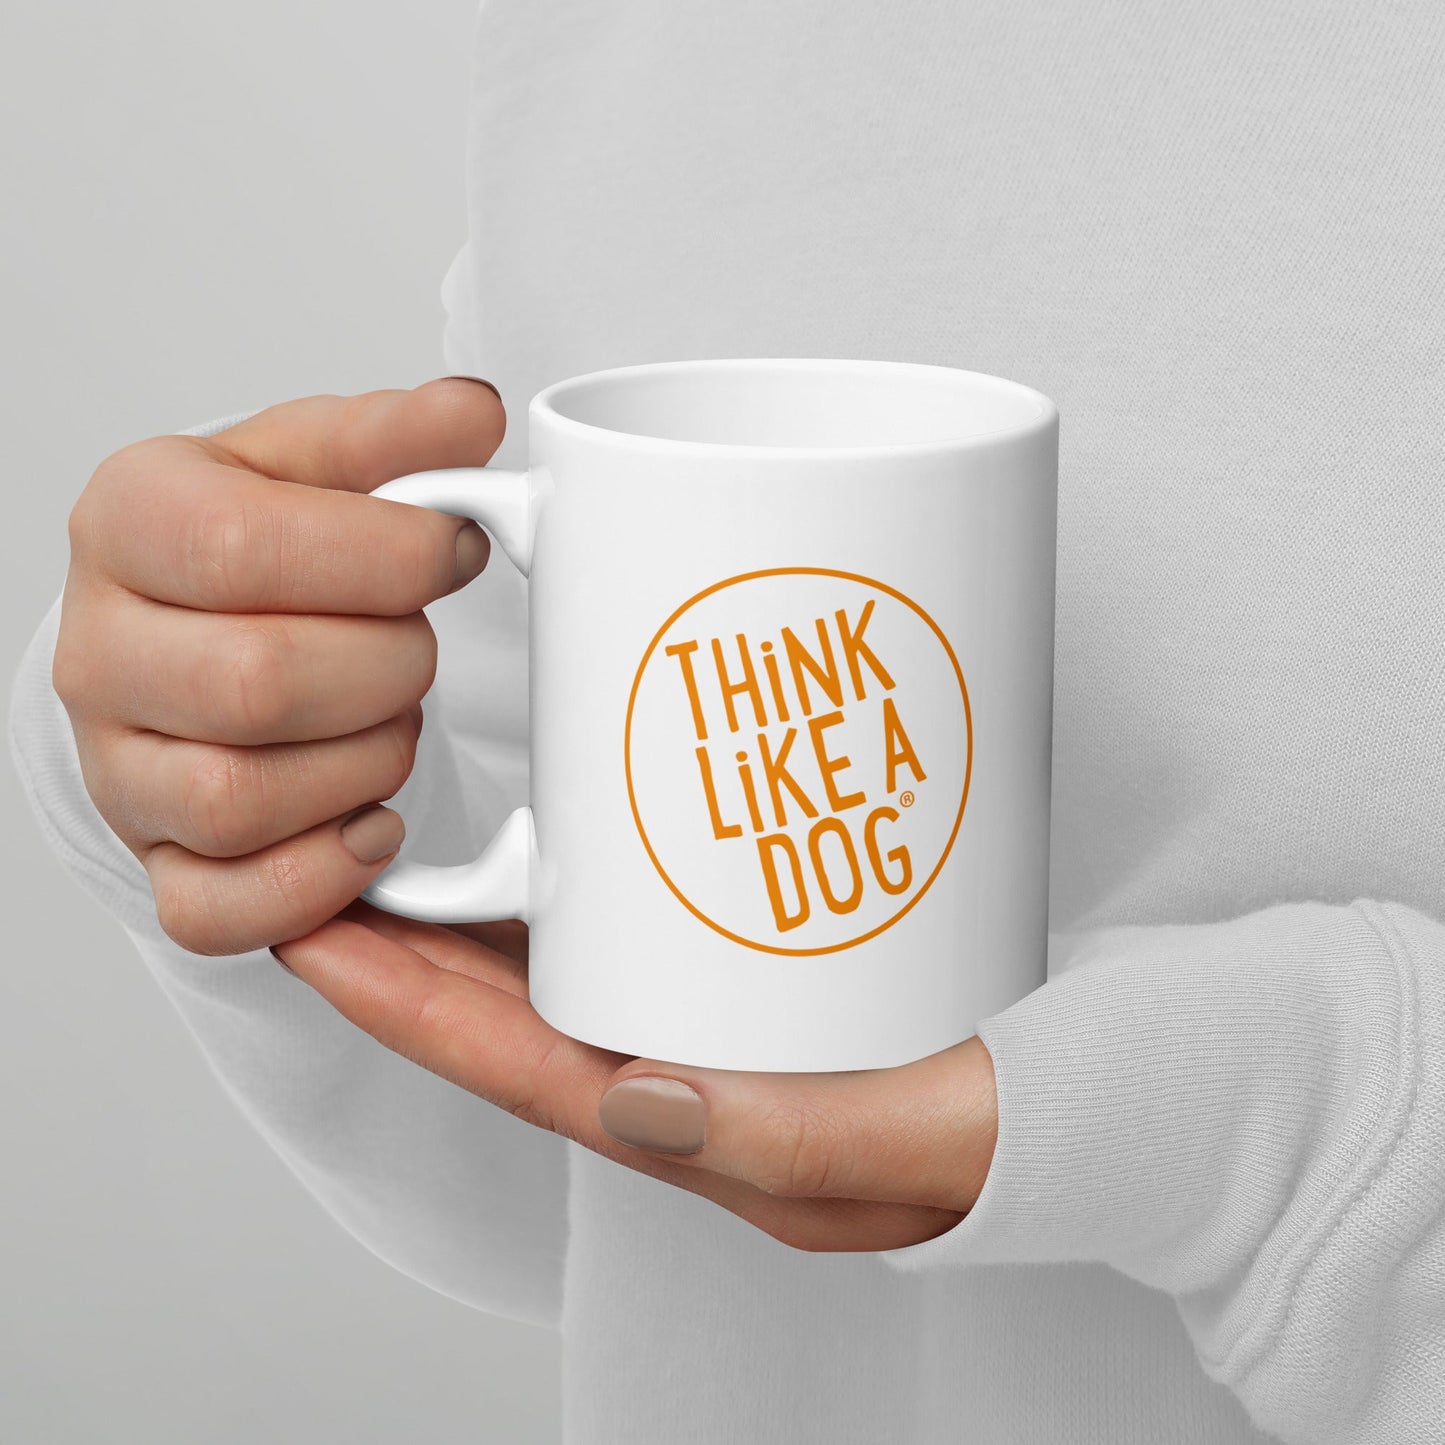 A person holding a white mug with their right hand. The mug has a text design that reads 'THINK LIKE A DOG' in bold, orange letters inside an orange circle outline.